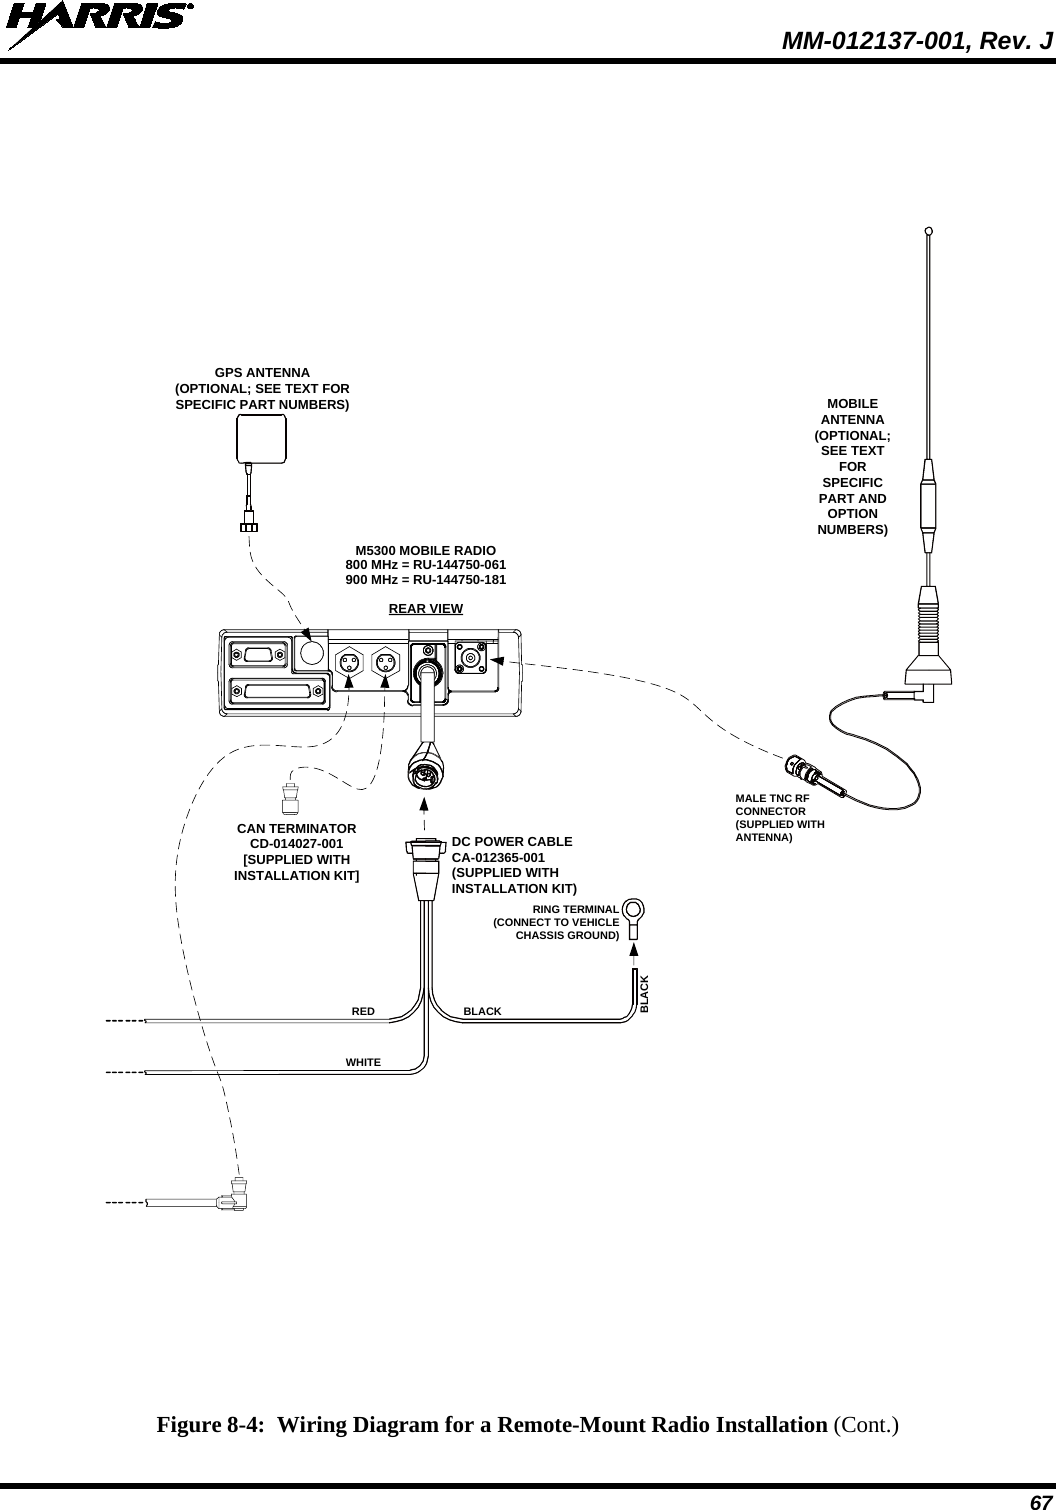  MM-012137-001, Rev. J 67  Figure 8-4:  Wiring Diagram for a Remote-Mount Radio Installation (Cont.)  GPS ANTENNA(OPTIONAL; SEE TEXT FOR SPECIFIC PART NUMBERS)DC POWER CABLECA-012365-001(SUPPLIED WITH INSTALLATION KIT)RING TERMINAL (CONNECT TO VEHICLE CHASSIS GROUND)BLACKBLACKREDWHITEM5300 MOBILE RADIO800 MHz = RU-144750-061900 MHz = RU-144750-181REAR VIEWMOBILEANTENNA(OPTIONAL;SEE TEXT FOR SPECIFIC PART AND OPTION NUMBERS)MALE TNC RF CONNECTOR(SUPPLIED WITH ANTENNA)CAN TERMINATORCD-014027-001[SUPPLIED WITH INSTALLATION KIT]